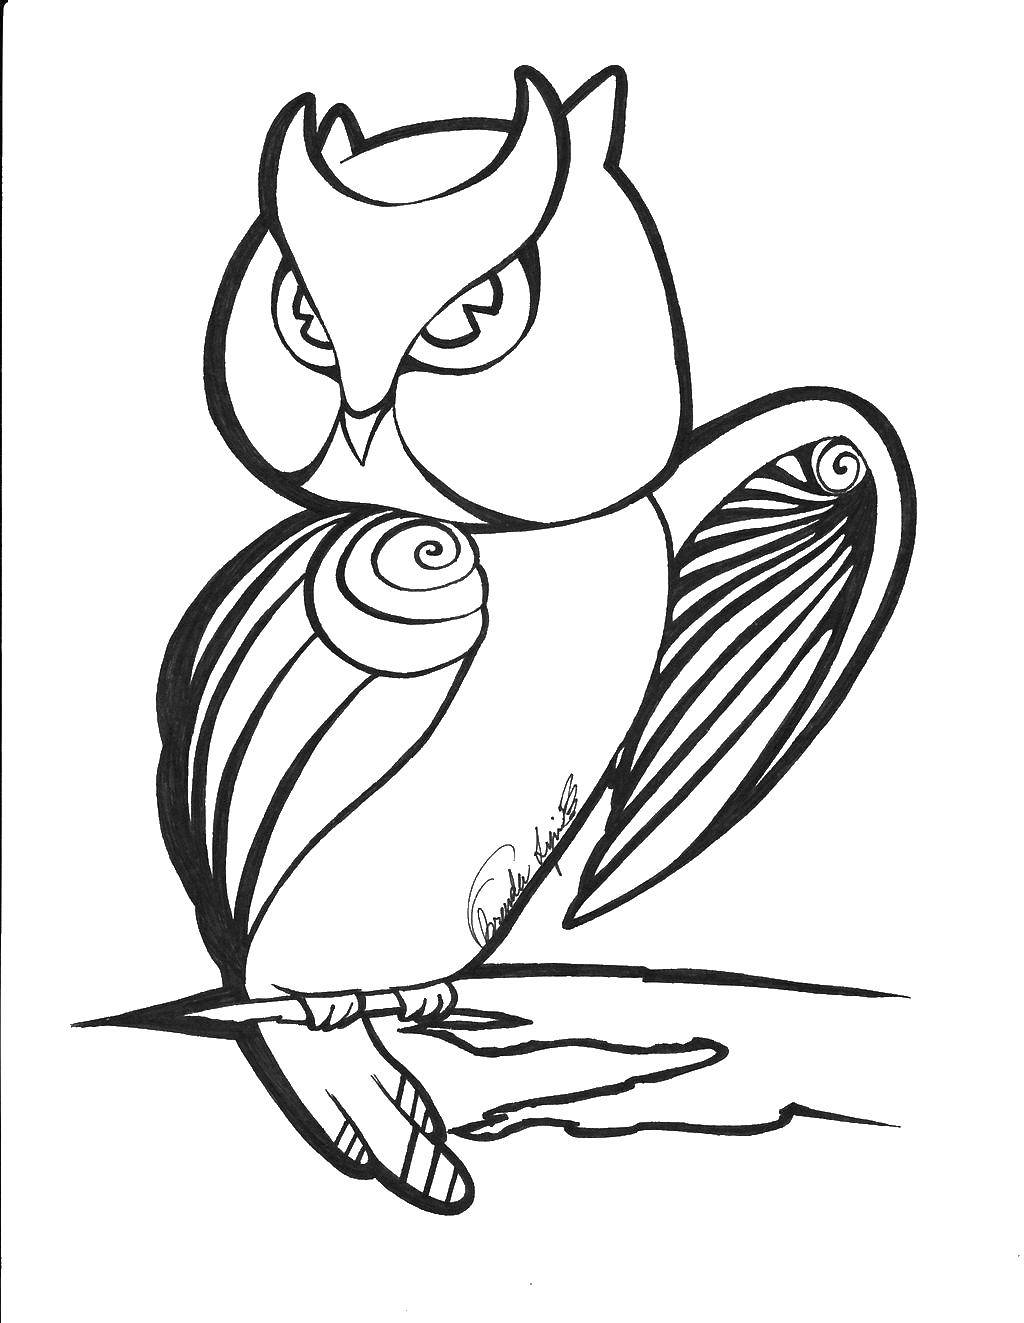 Coloring Owl night bird. Category The contours for cutting out the birds. Tags:  owl, owl.